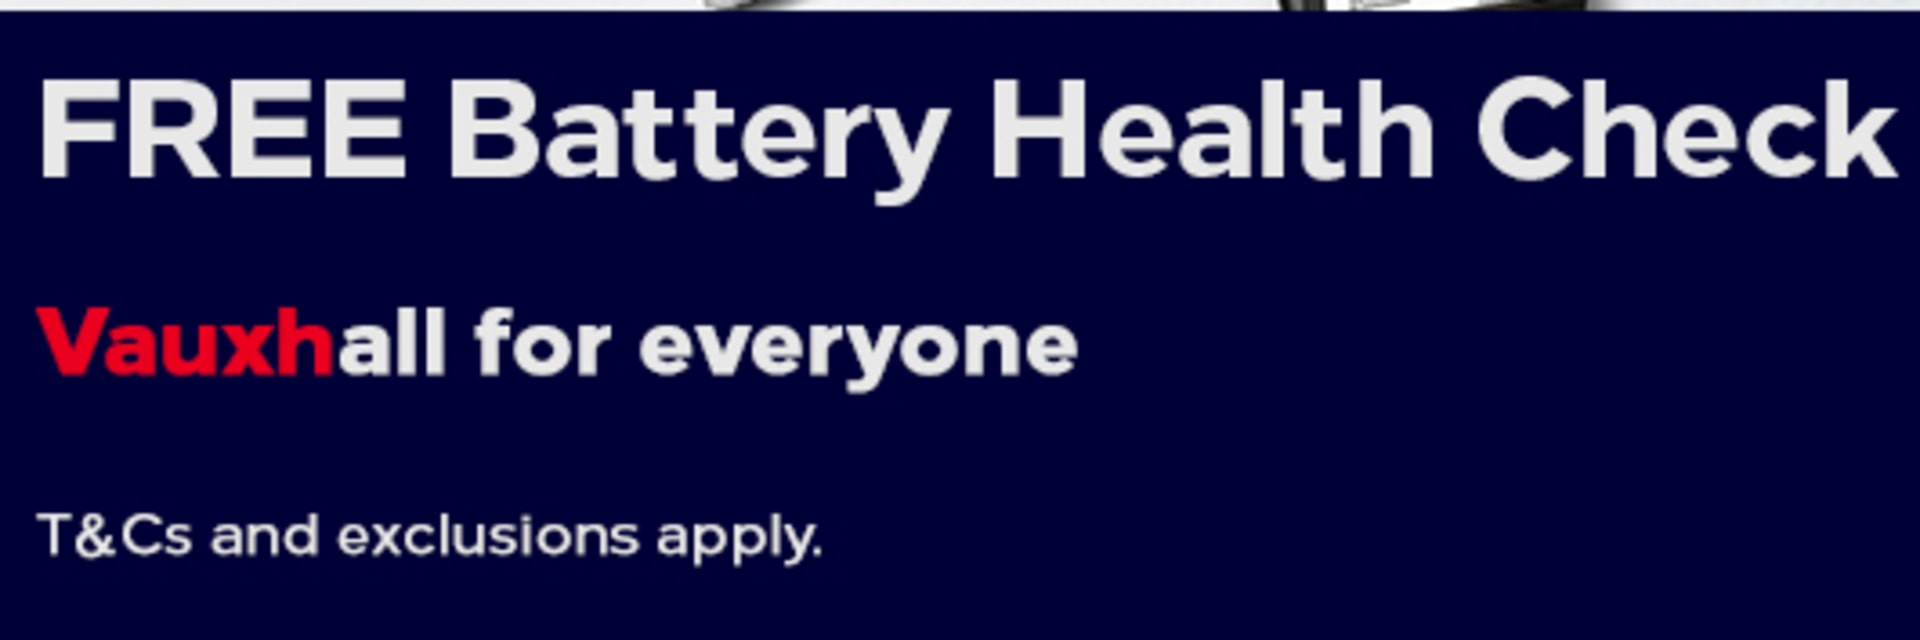 FREE Battery Health Check